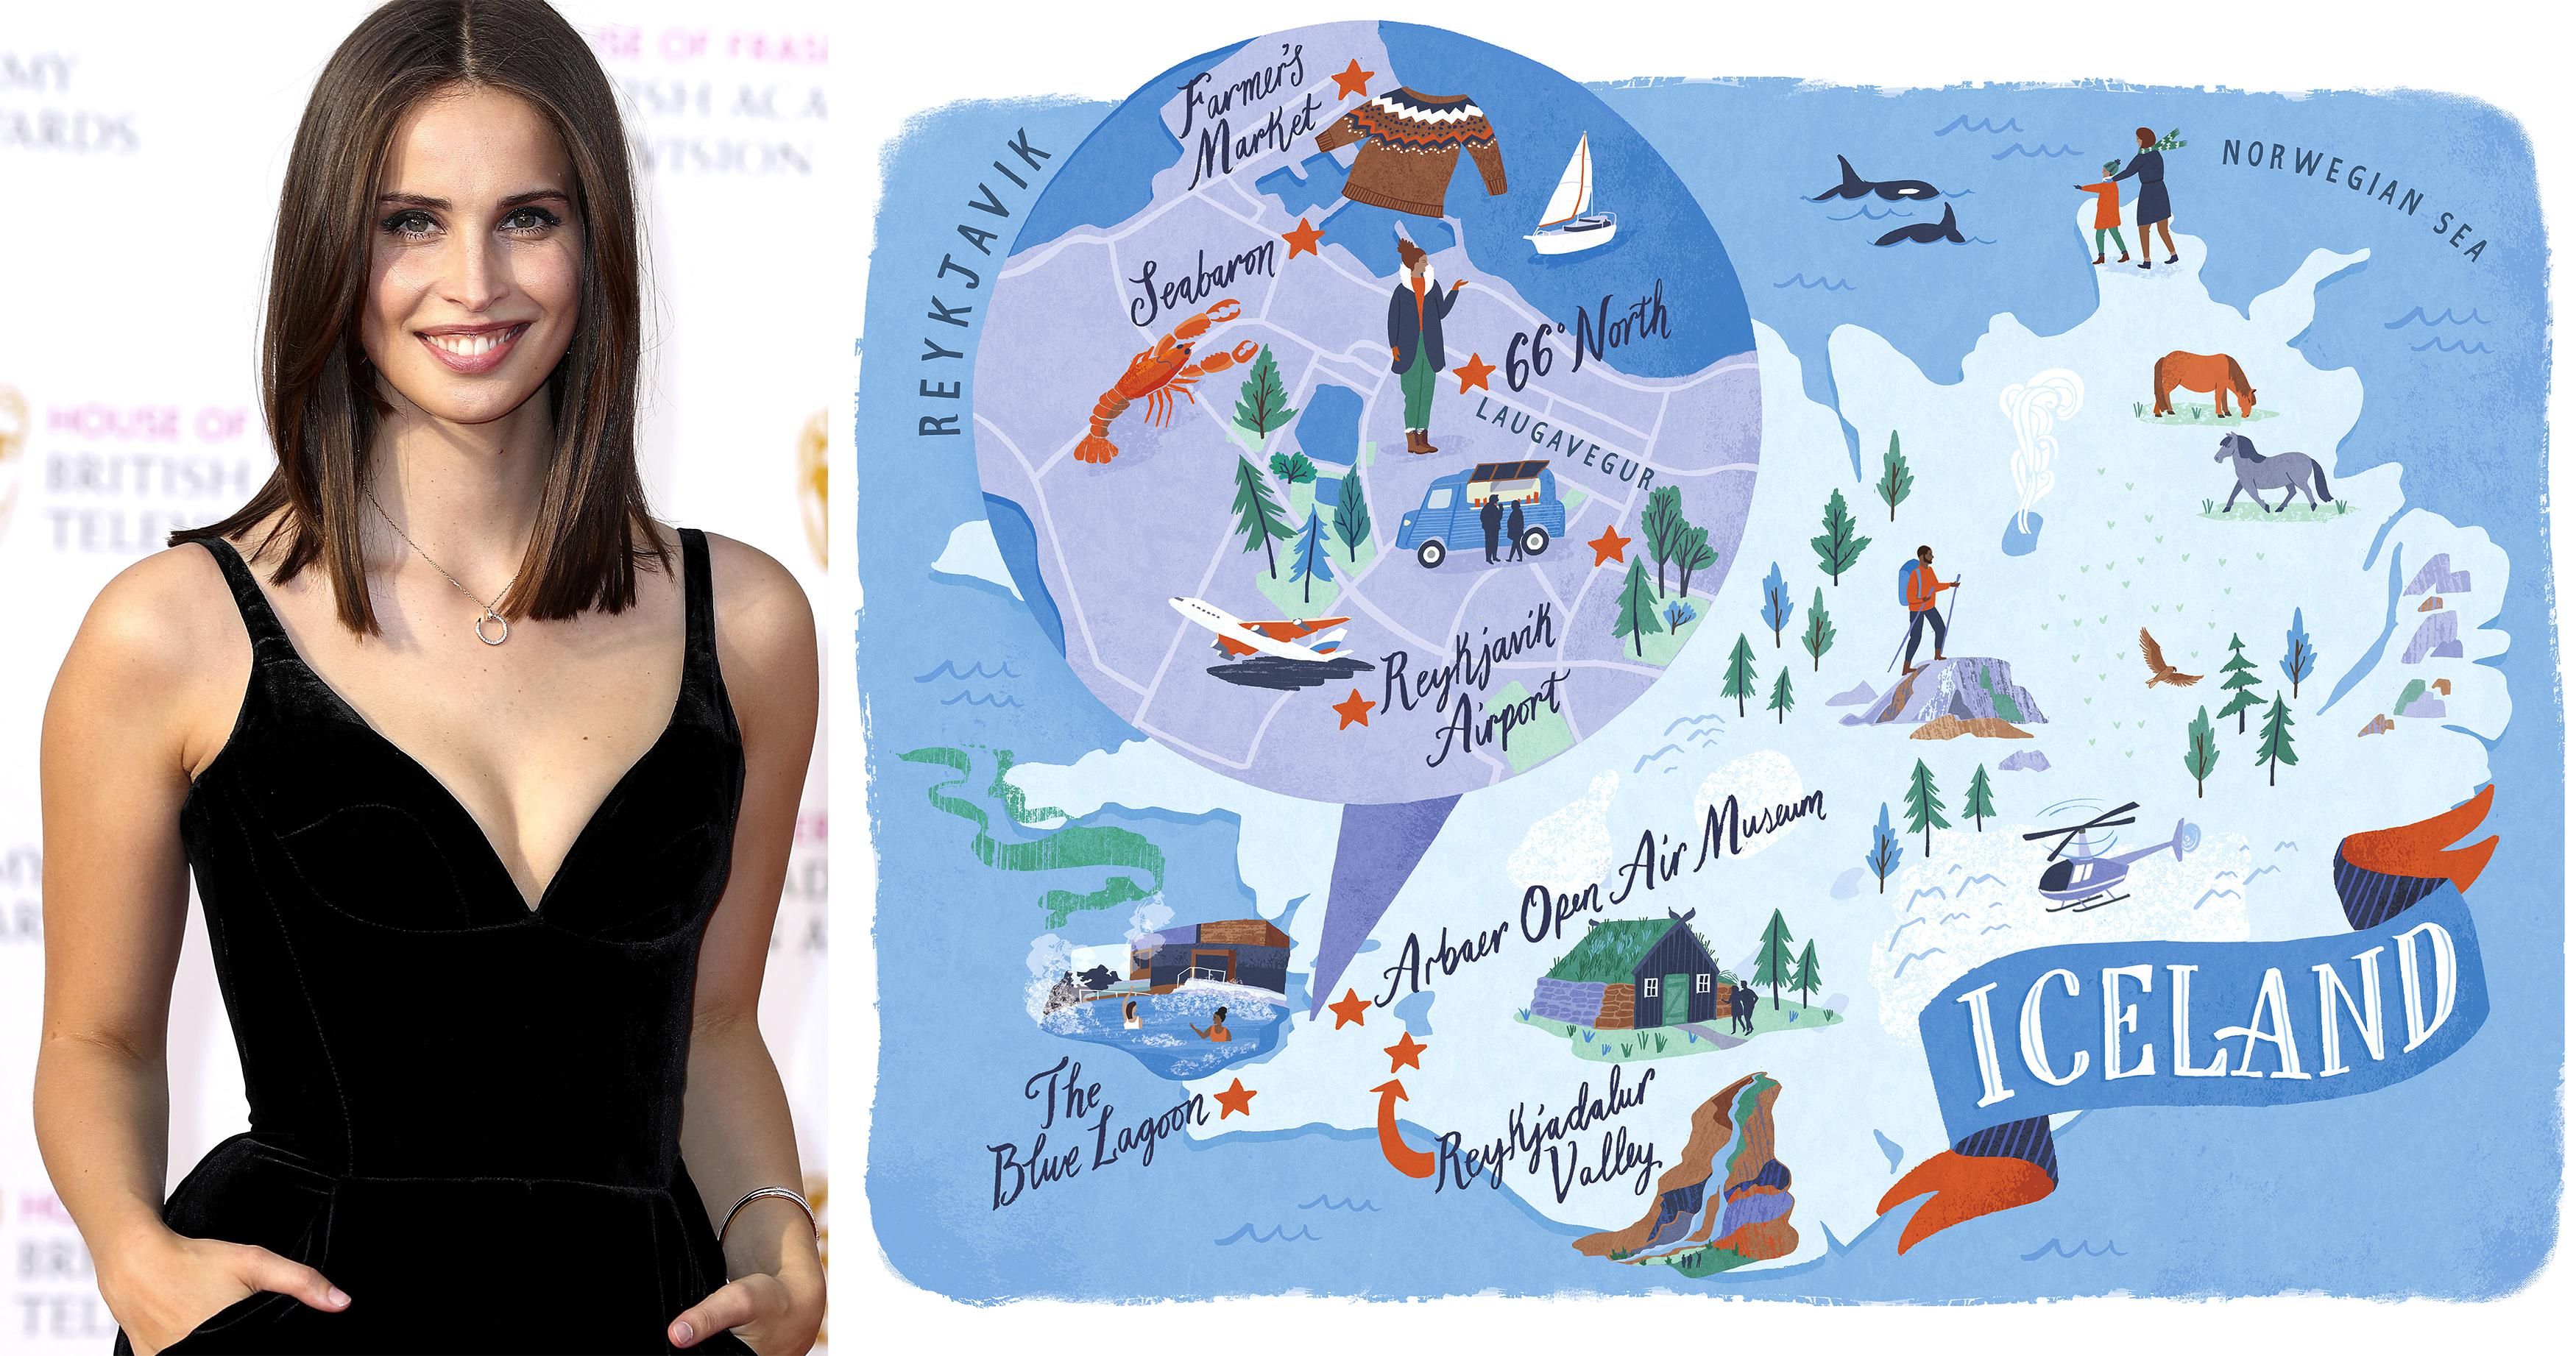 Actress Heida Reed in a black dress and a stylized map of Iceland in blue and white tones.